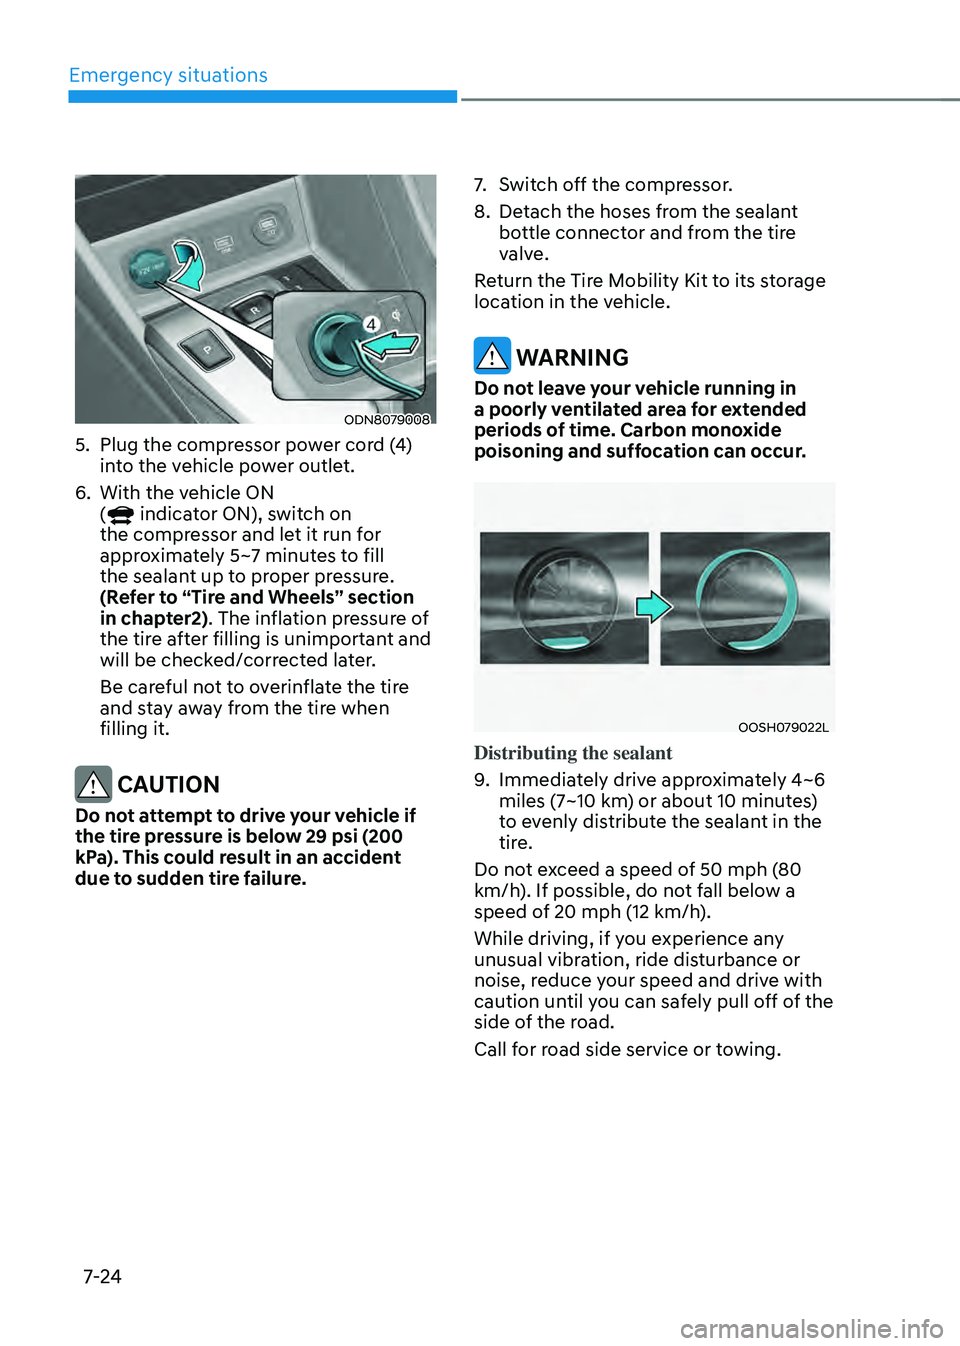 HYUNDAI SONATA HYBRID 2022 Owners Guide Emergency situations
7-24
ODN8079008
5. Plug the compressor power cord (4) 
into the vehicle power outlet.
6. With the vehicle ON 
( indicator ON), switch on 
the compressor and let it run for 
approx